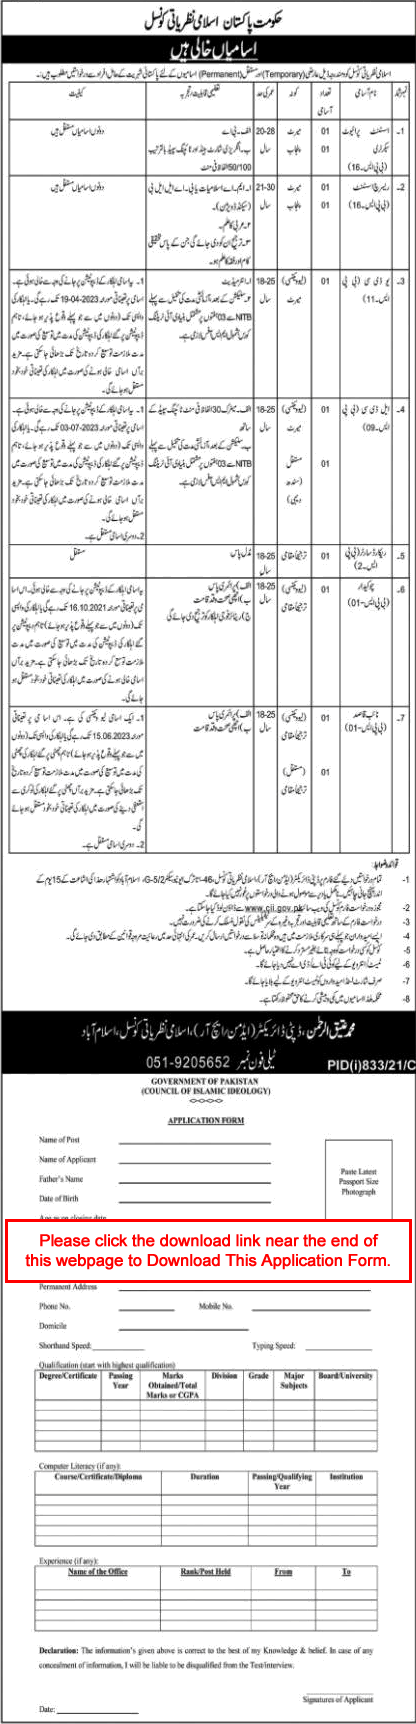 Council of Islamic Ideology Islamabad Jobs 2021 August Application Form Clerks, Assistants & Others Latest